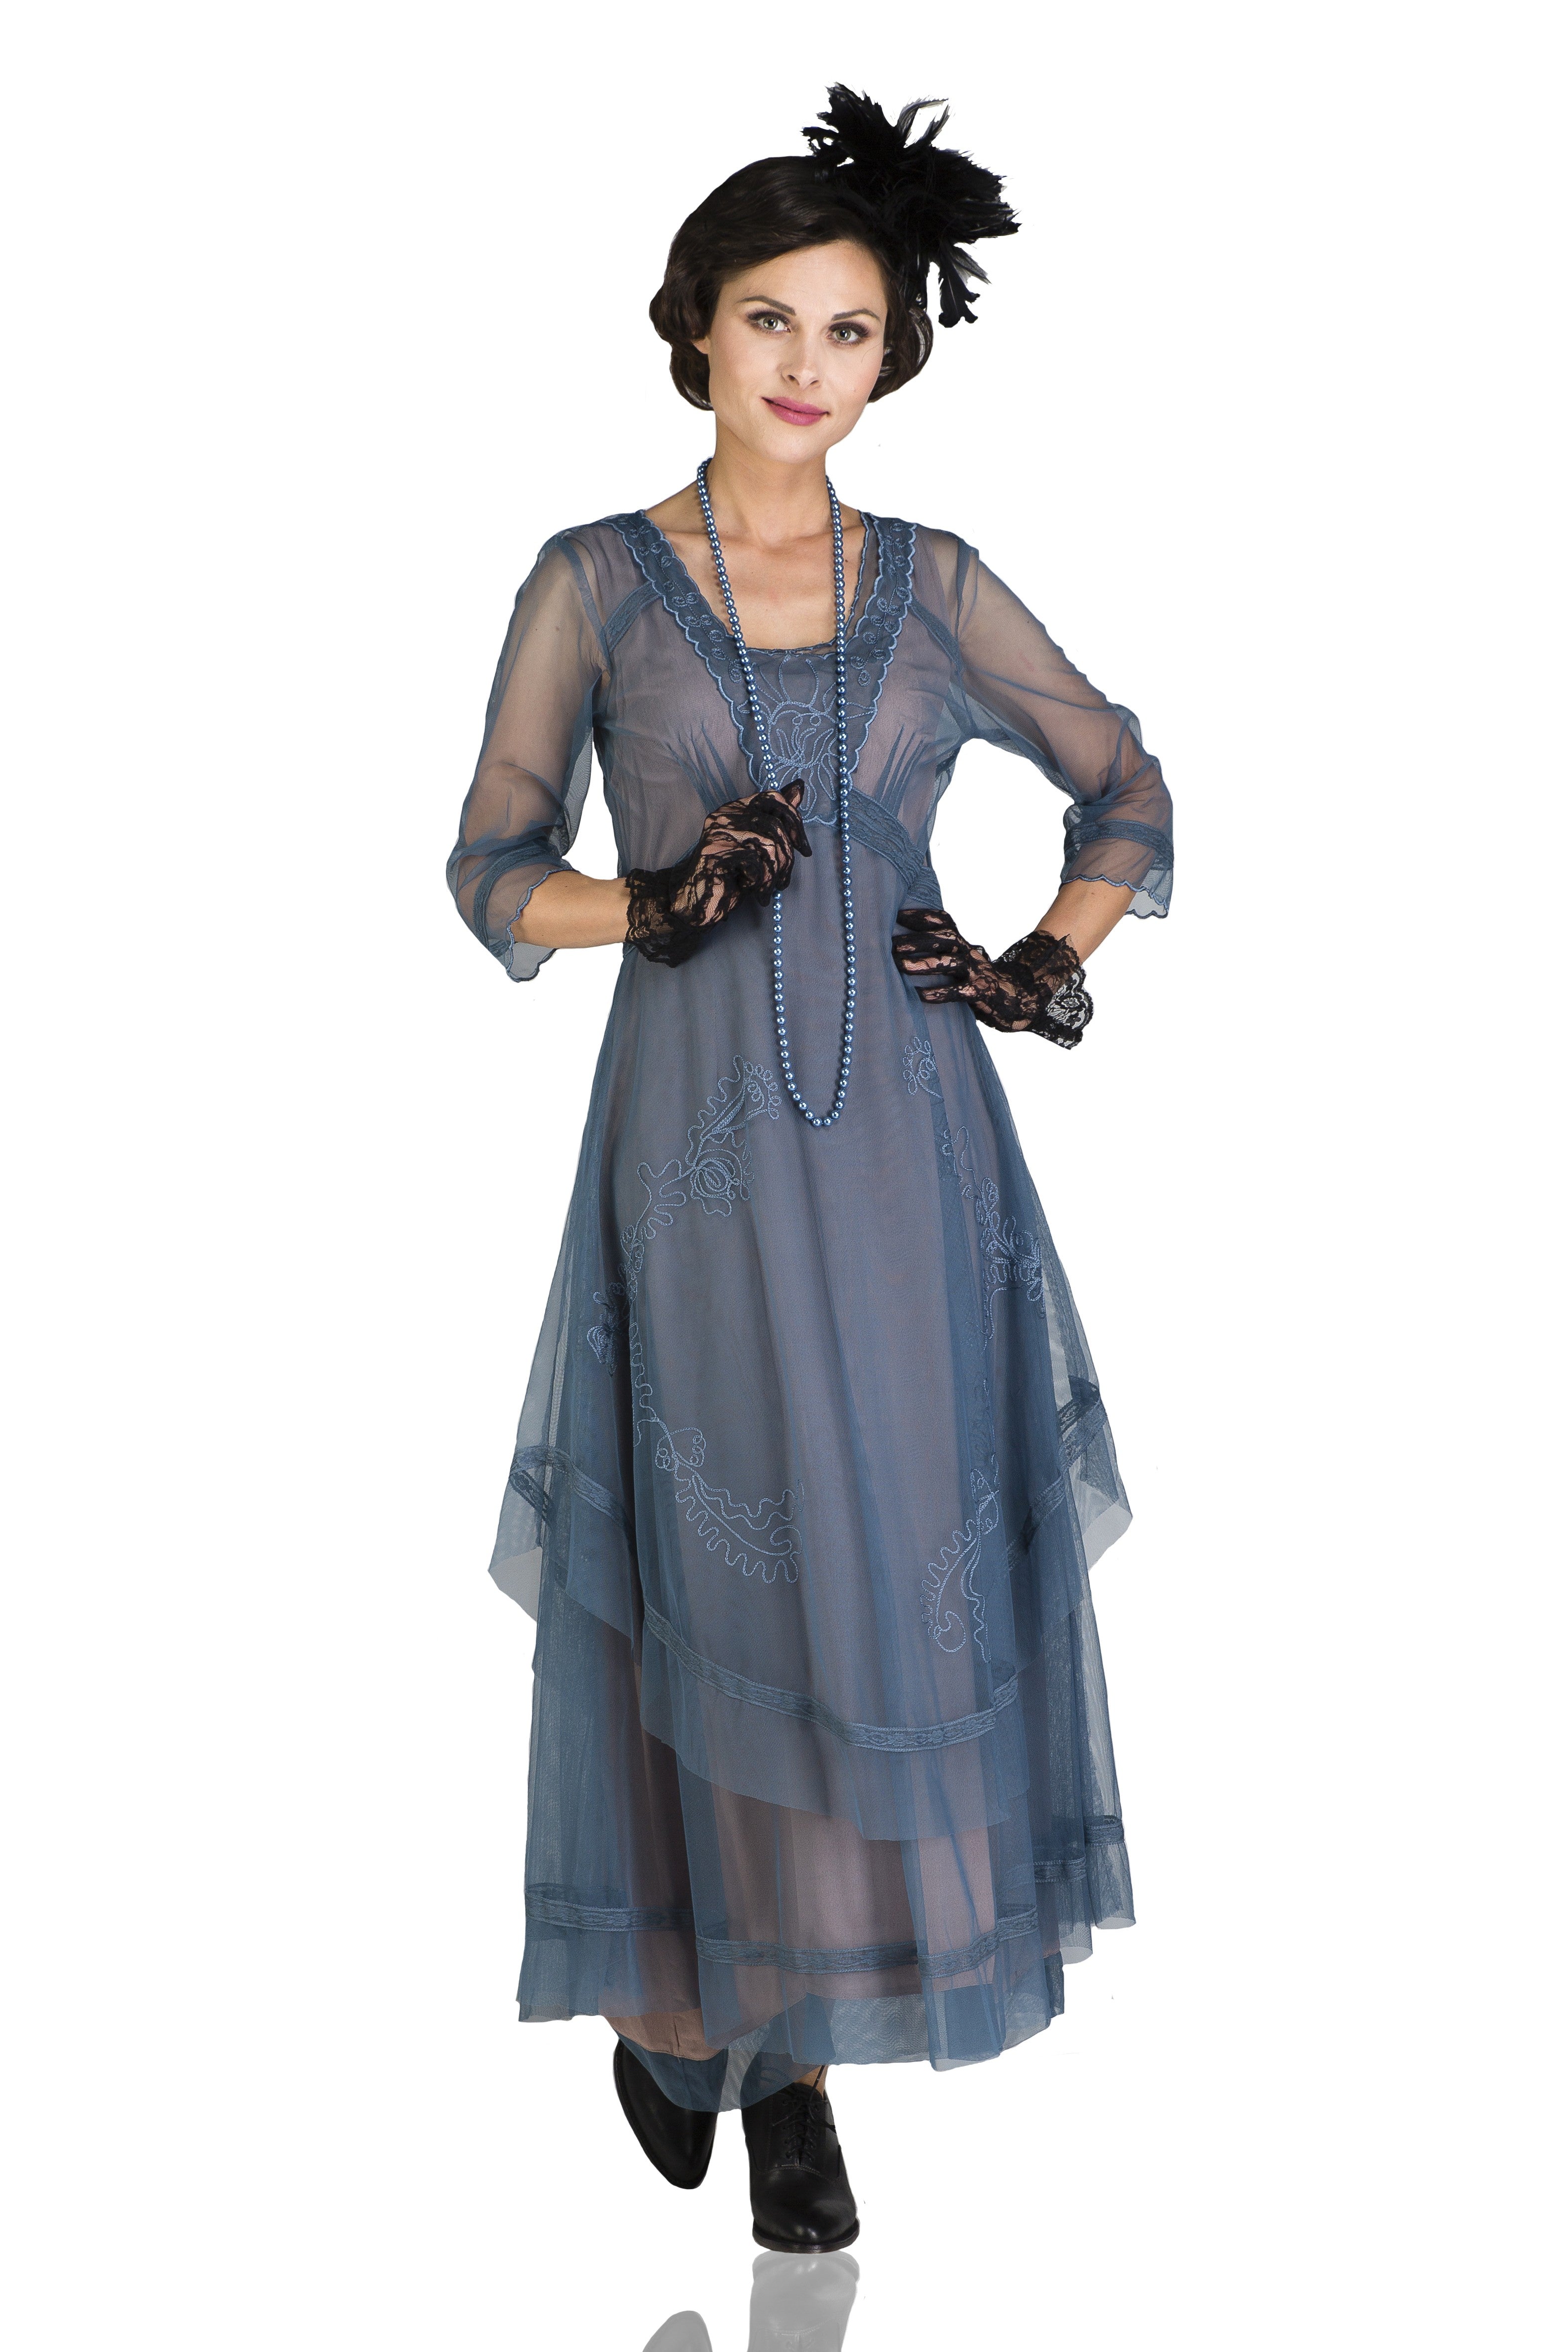 1920s Outfit Ideas: 10 Downton Abbey Inspired Costumes Mary Darling Dress in Azure by Nataya $265.00 AT vintagedancer.com